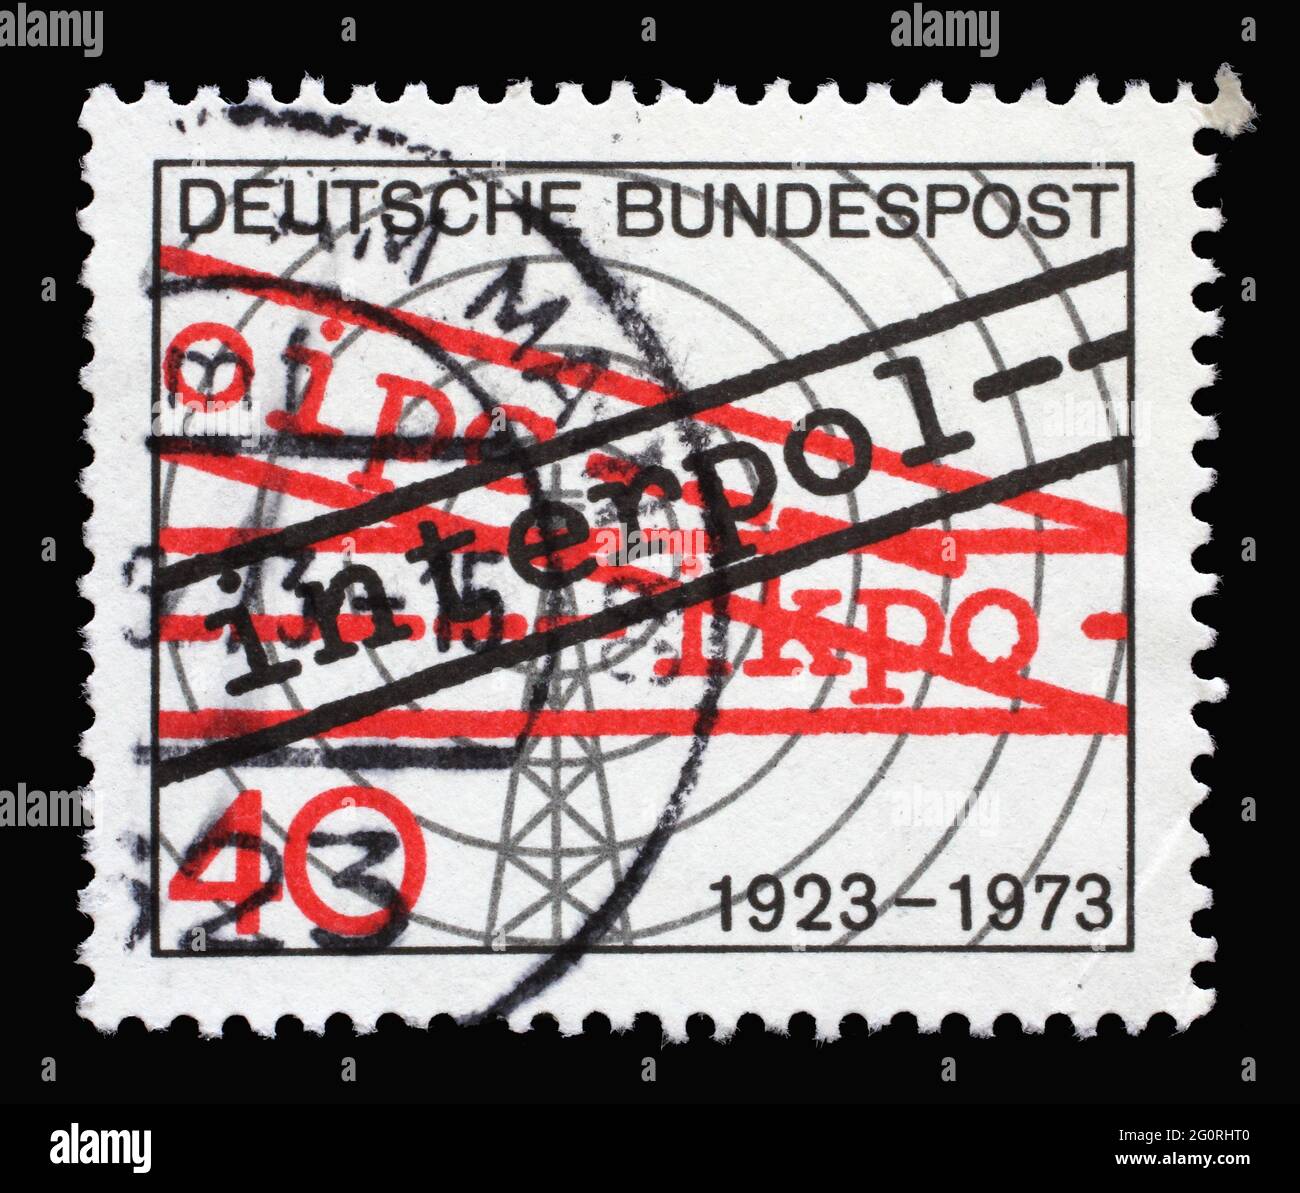 A stamp printed in Germany showing a transmission tower with radio waves and Interpol, 50th anniversary of International Criminal Police Organization, Stock Photo